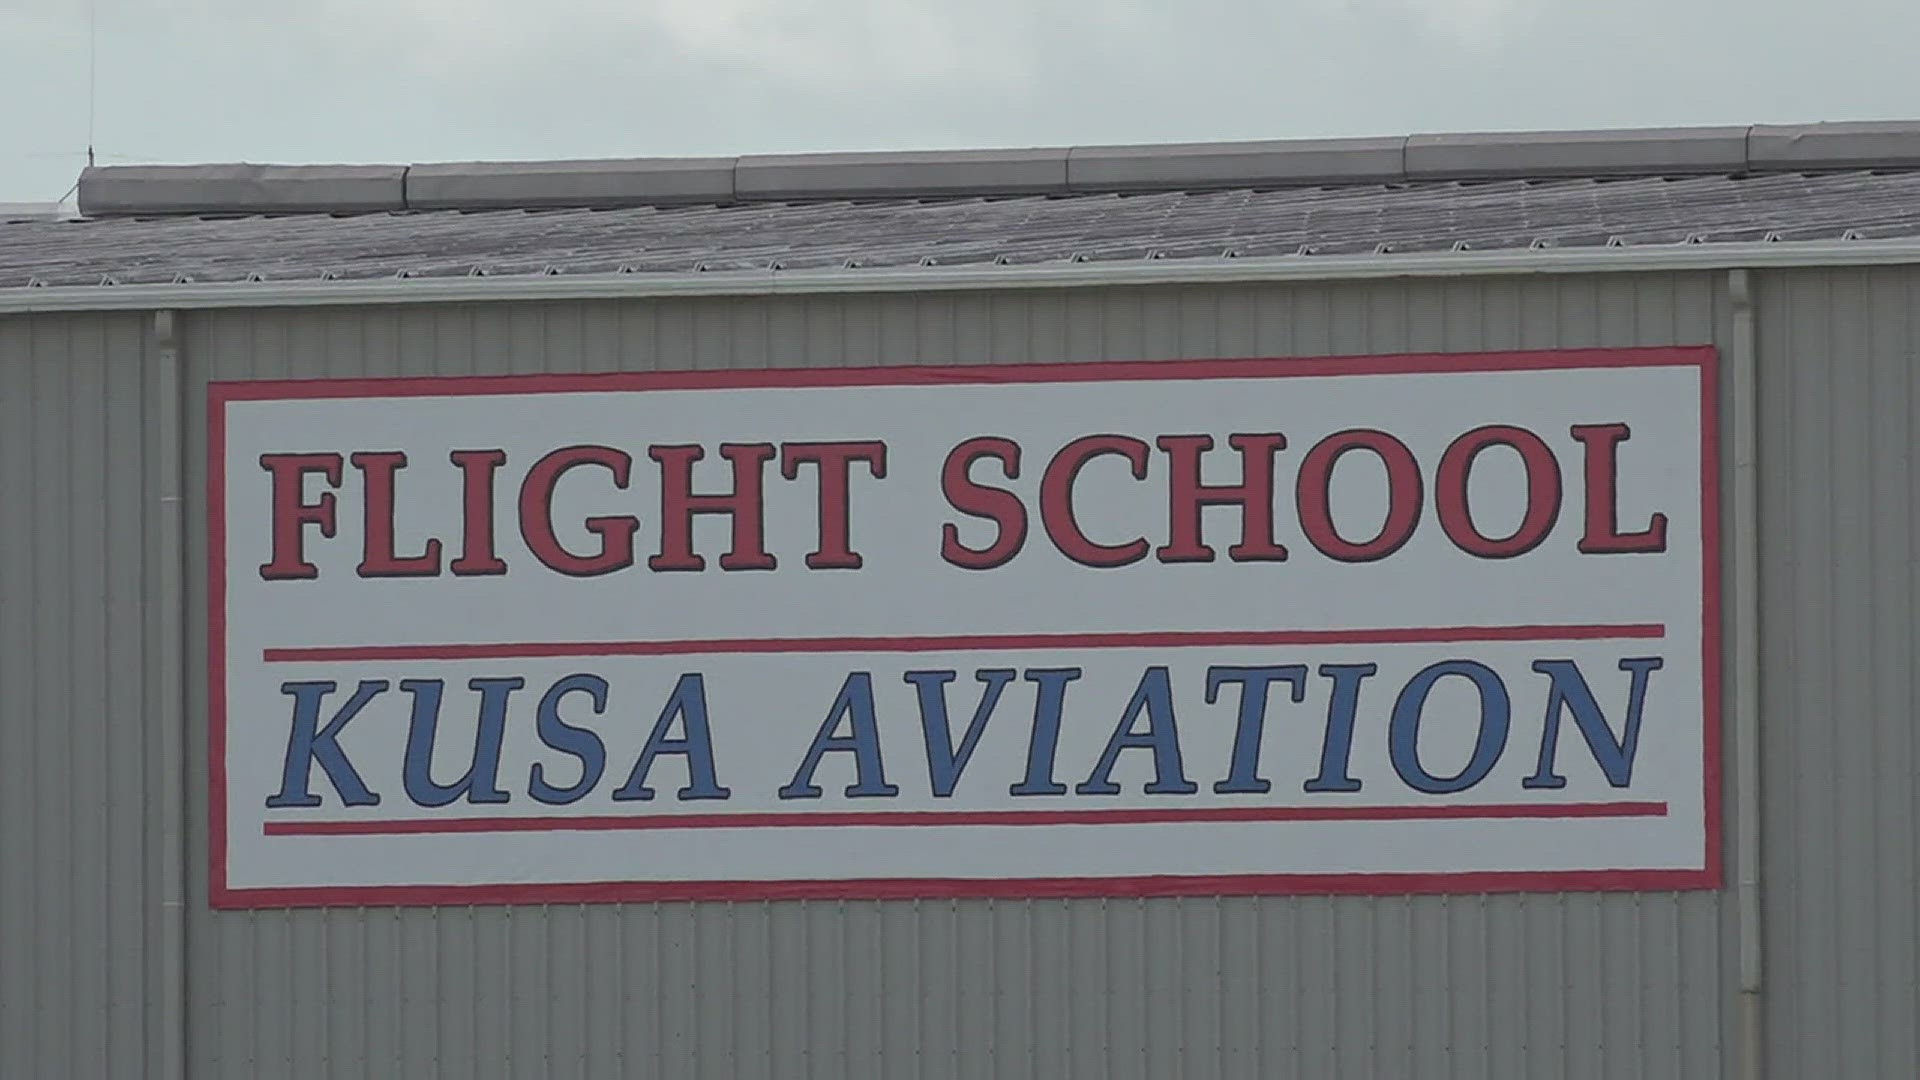 CEO of KUSA Aviation, LLC Kyle Knupple tells 12News the instructor and student didn't know their landing parts had fallen until they attempted to land the plane.